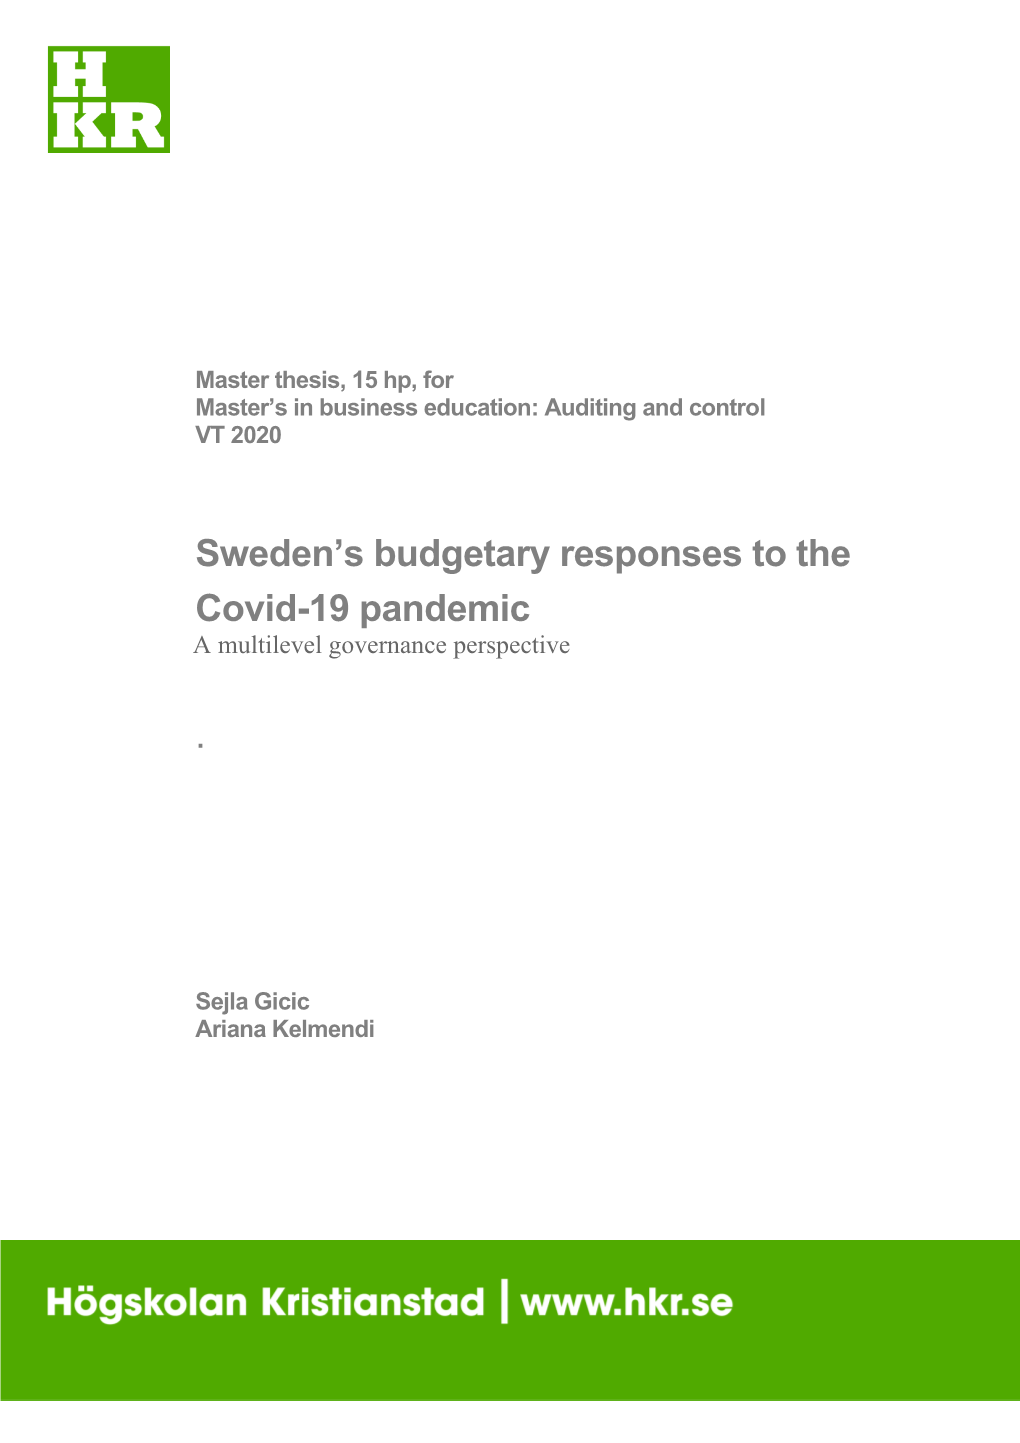 Sweden's Budgetary Responses to the Covid-19 Pandemic